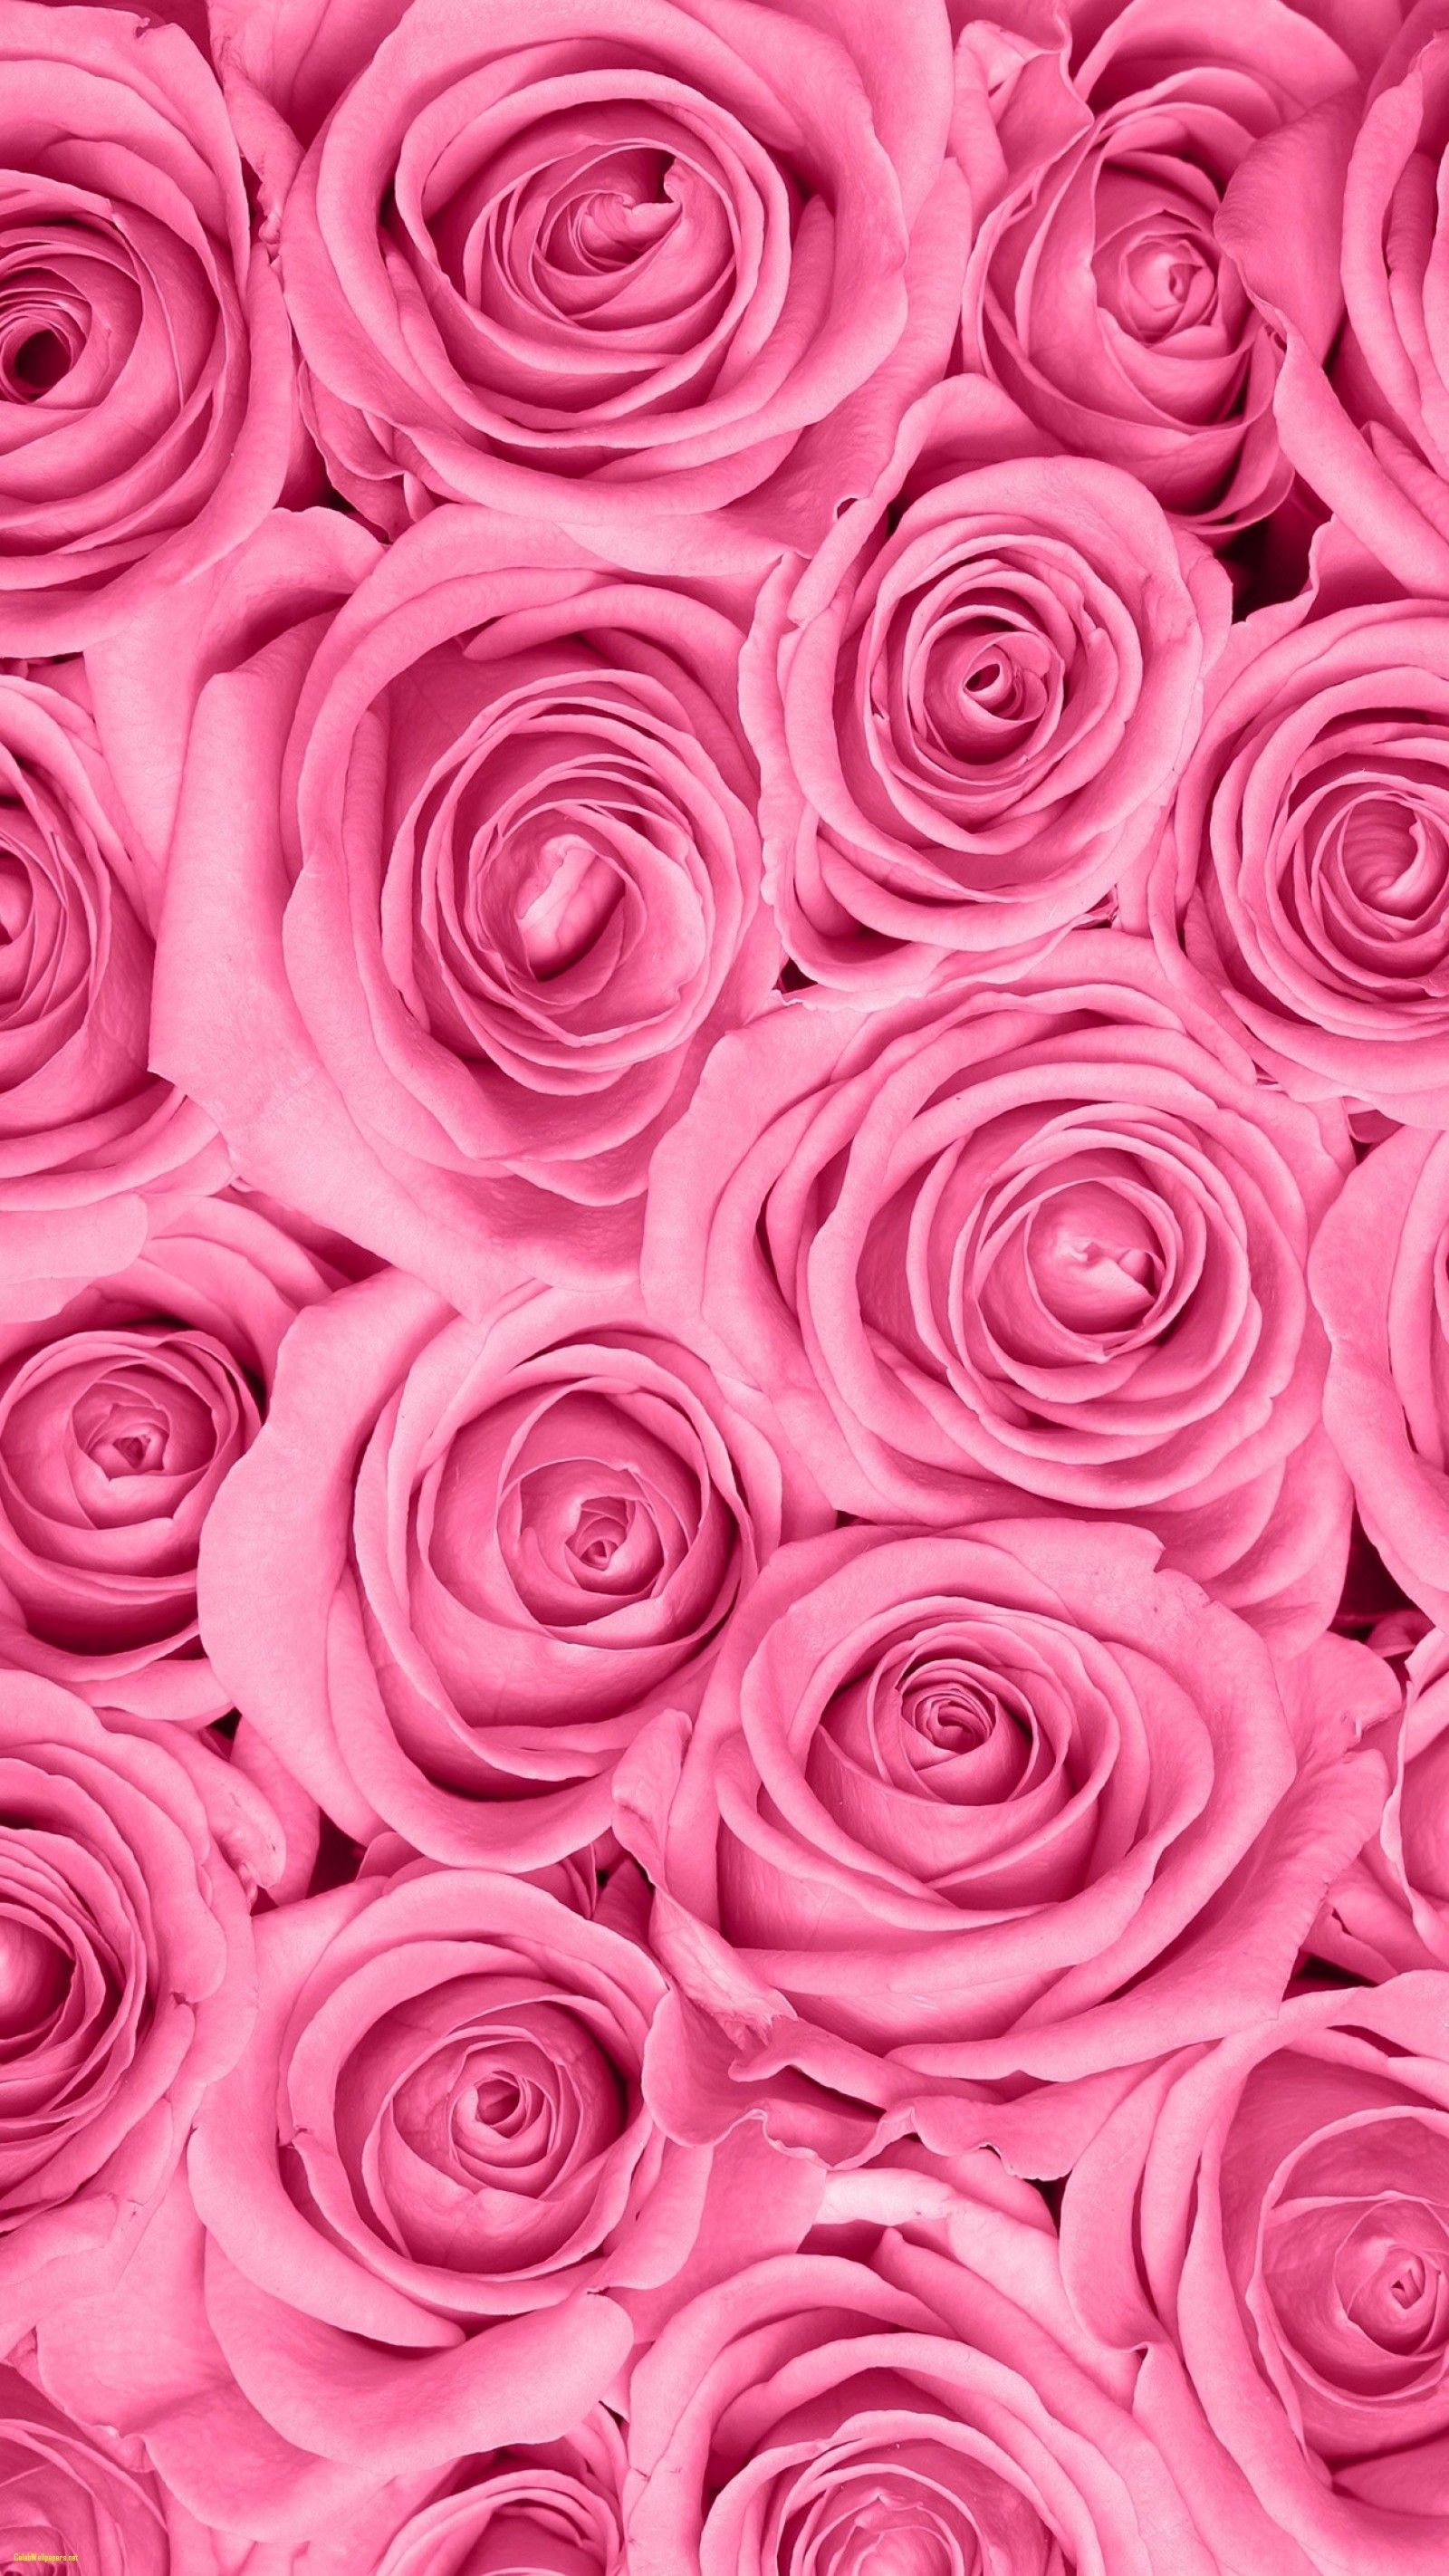 Wallpaper 3D Pink Rose Wallpapers for Bedroom TV Background Wall Mural -  Amazon.com